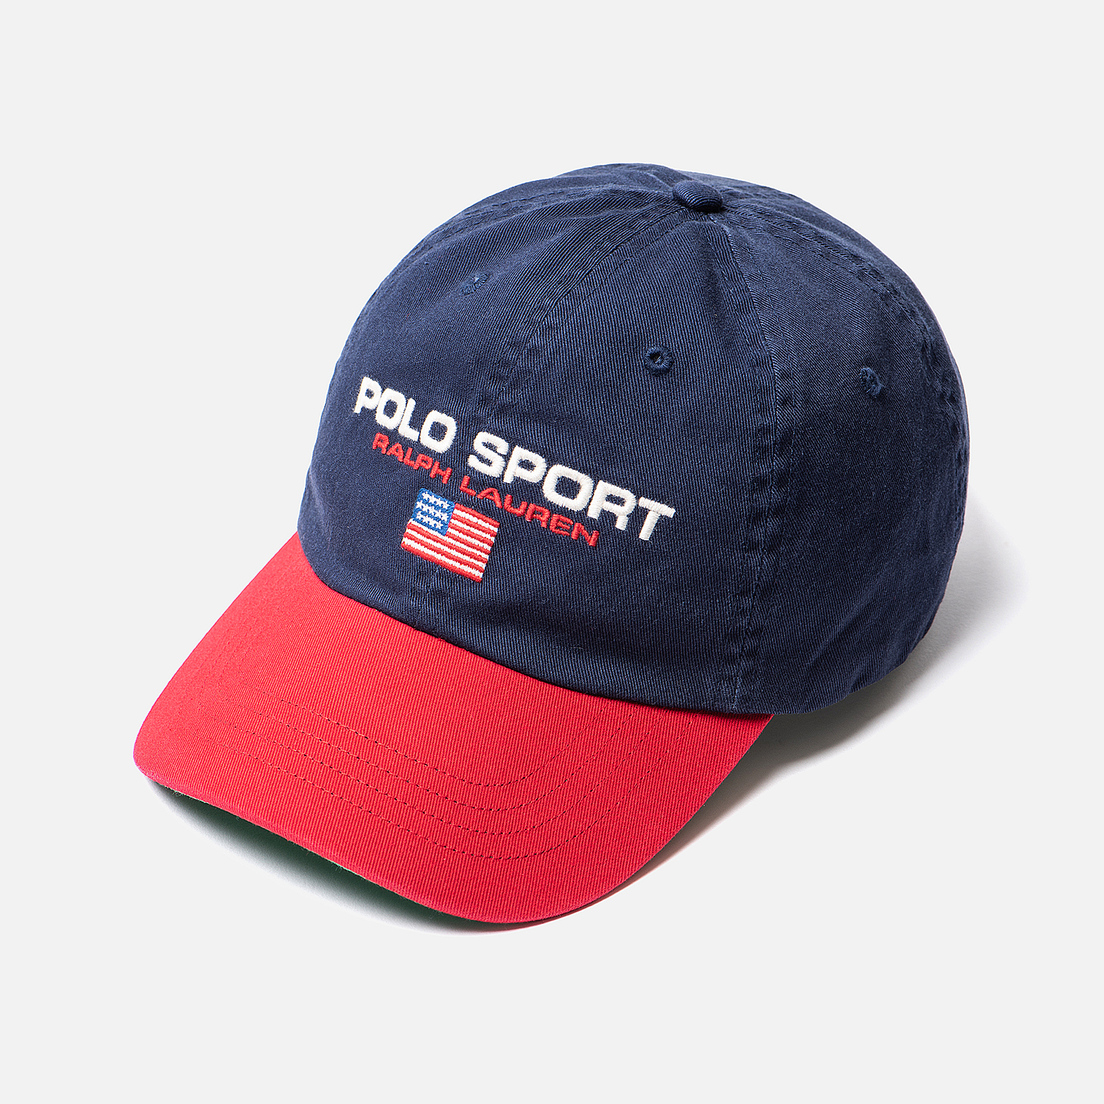 Polo Ralph Lauren Кепка Polo Sport Flag Embroidered